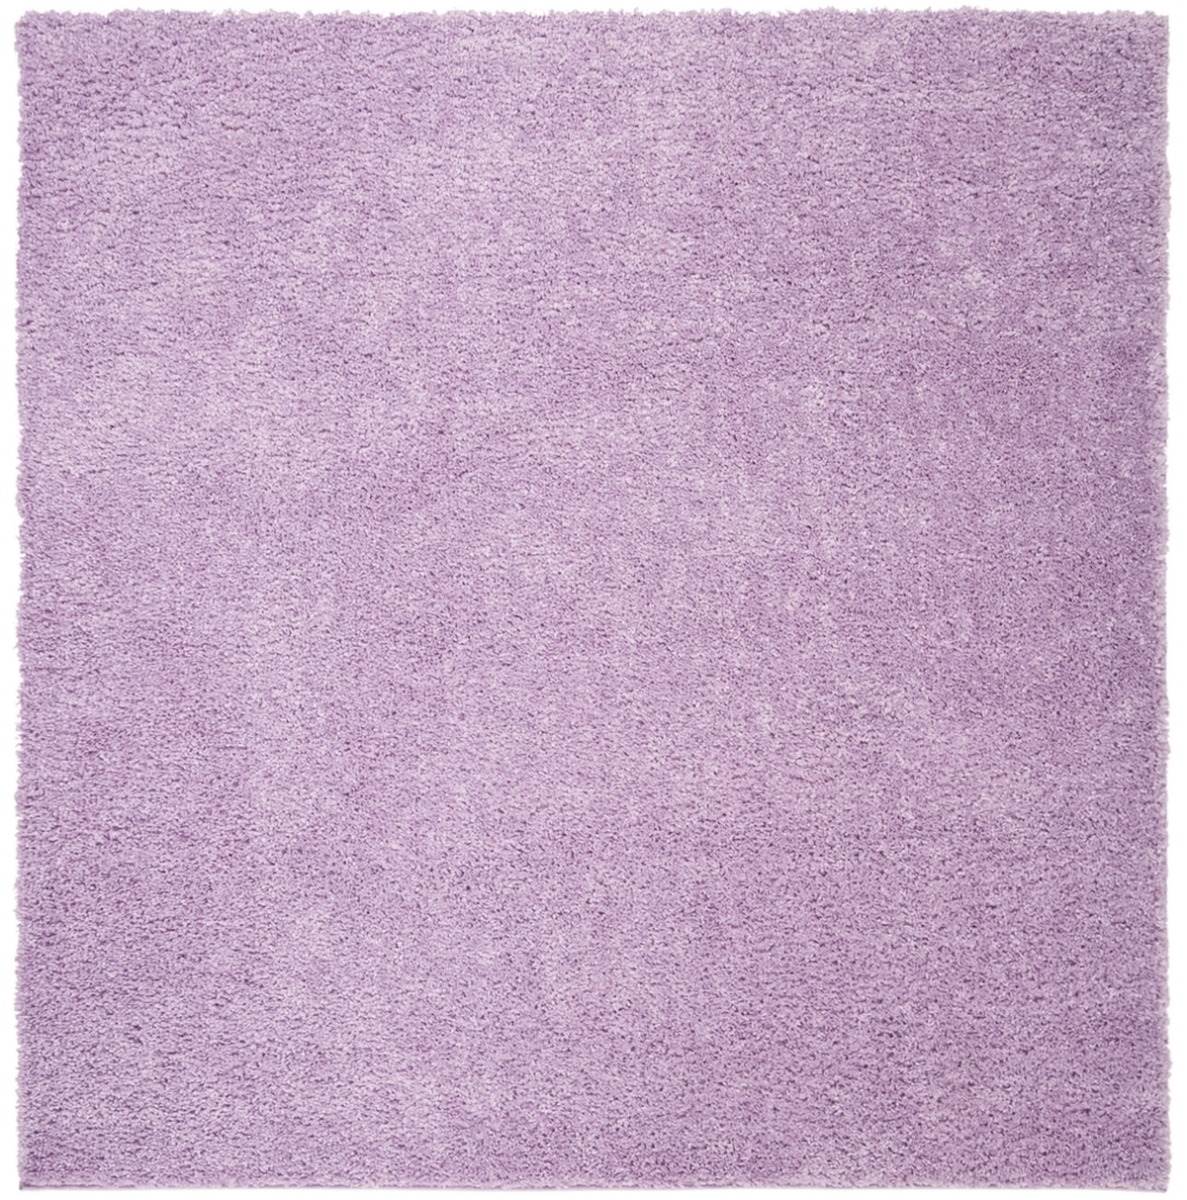 Aug900v-7sq August Shag Power Loomed Square Area Rug, Lilac - 6 Ft.-7 In. X 6 Ft.-7 In.